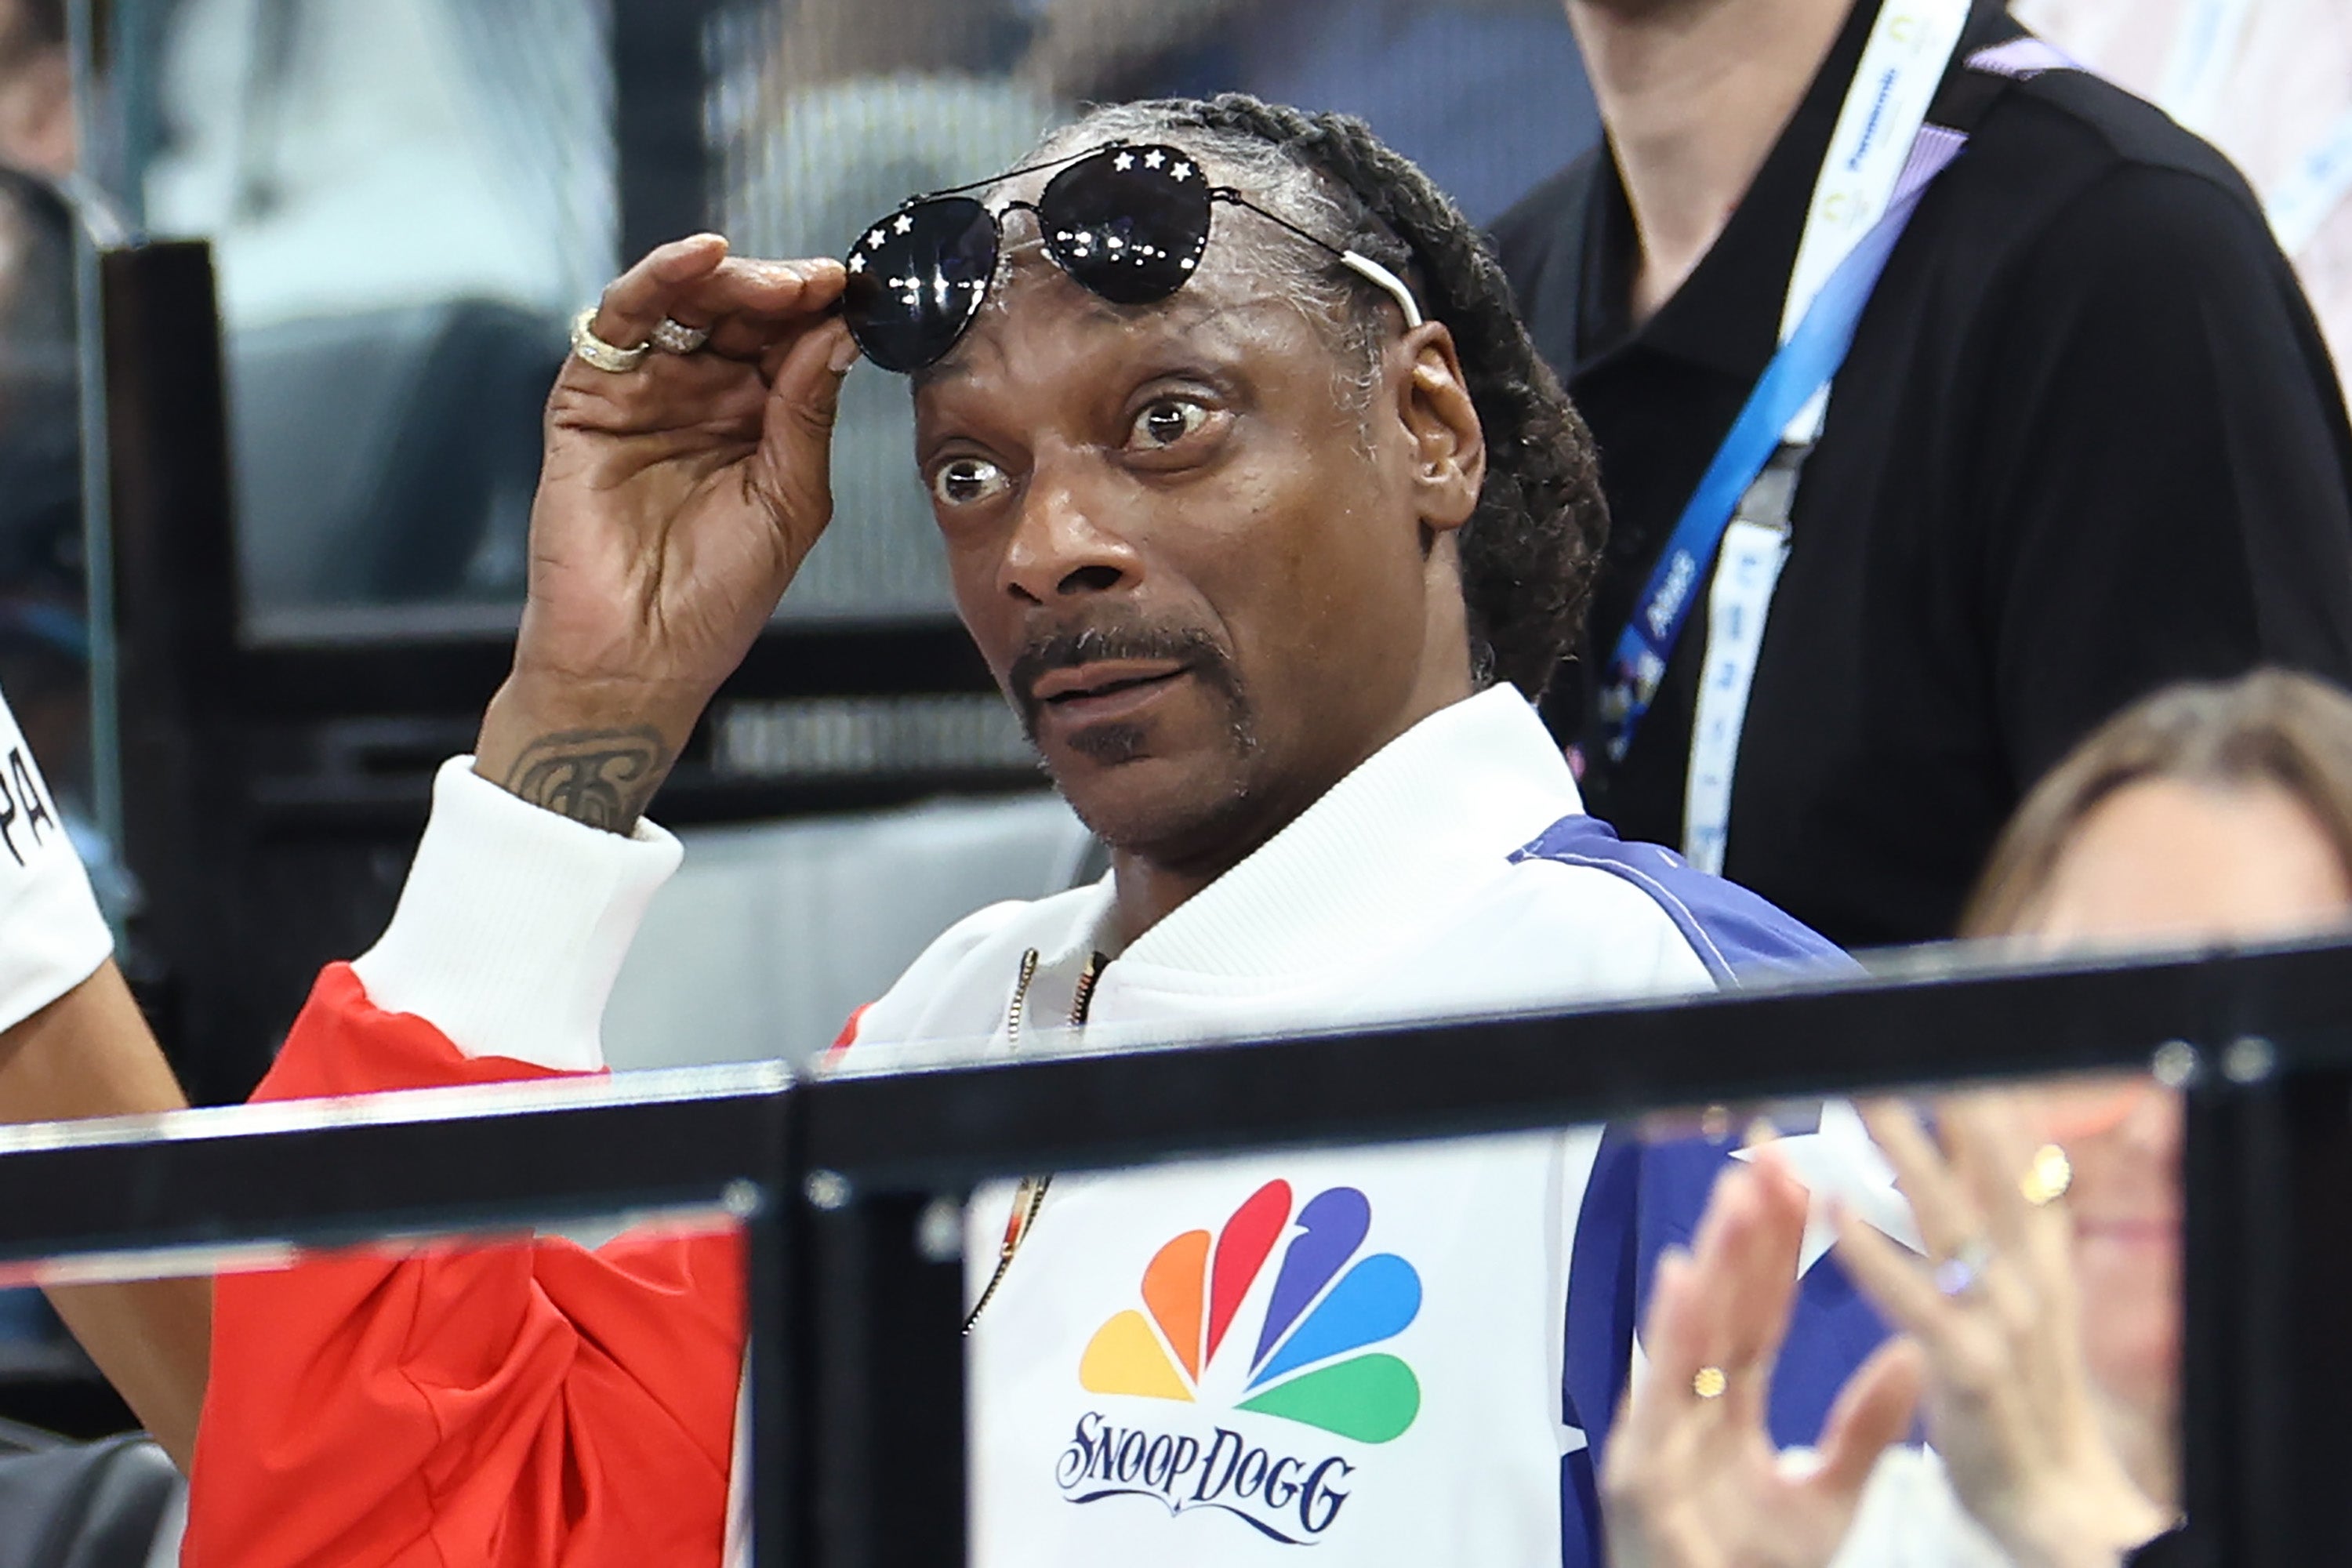 Snoop Dogg (R) attends the Artistic Gymnastics Women's Qualification